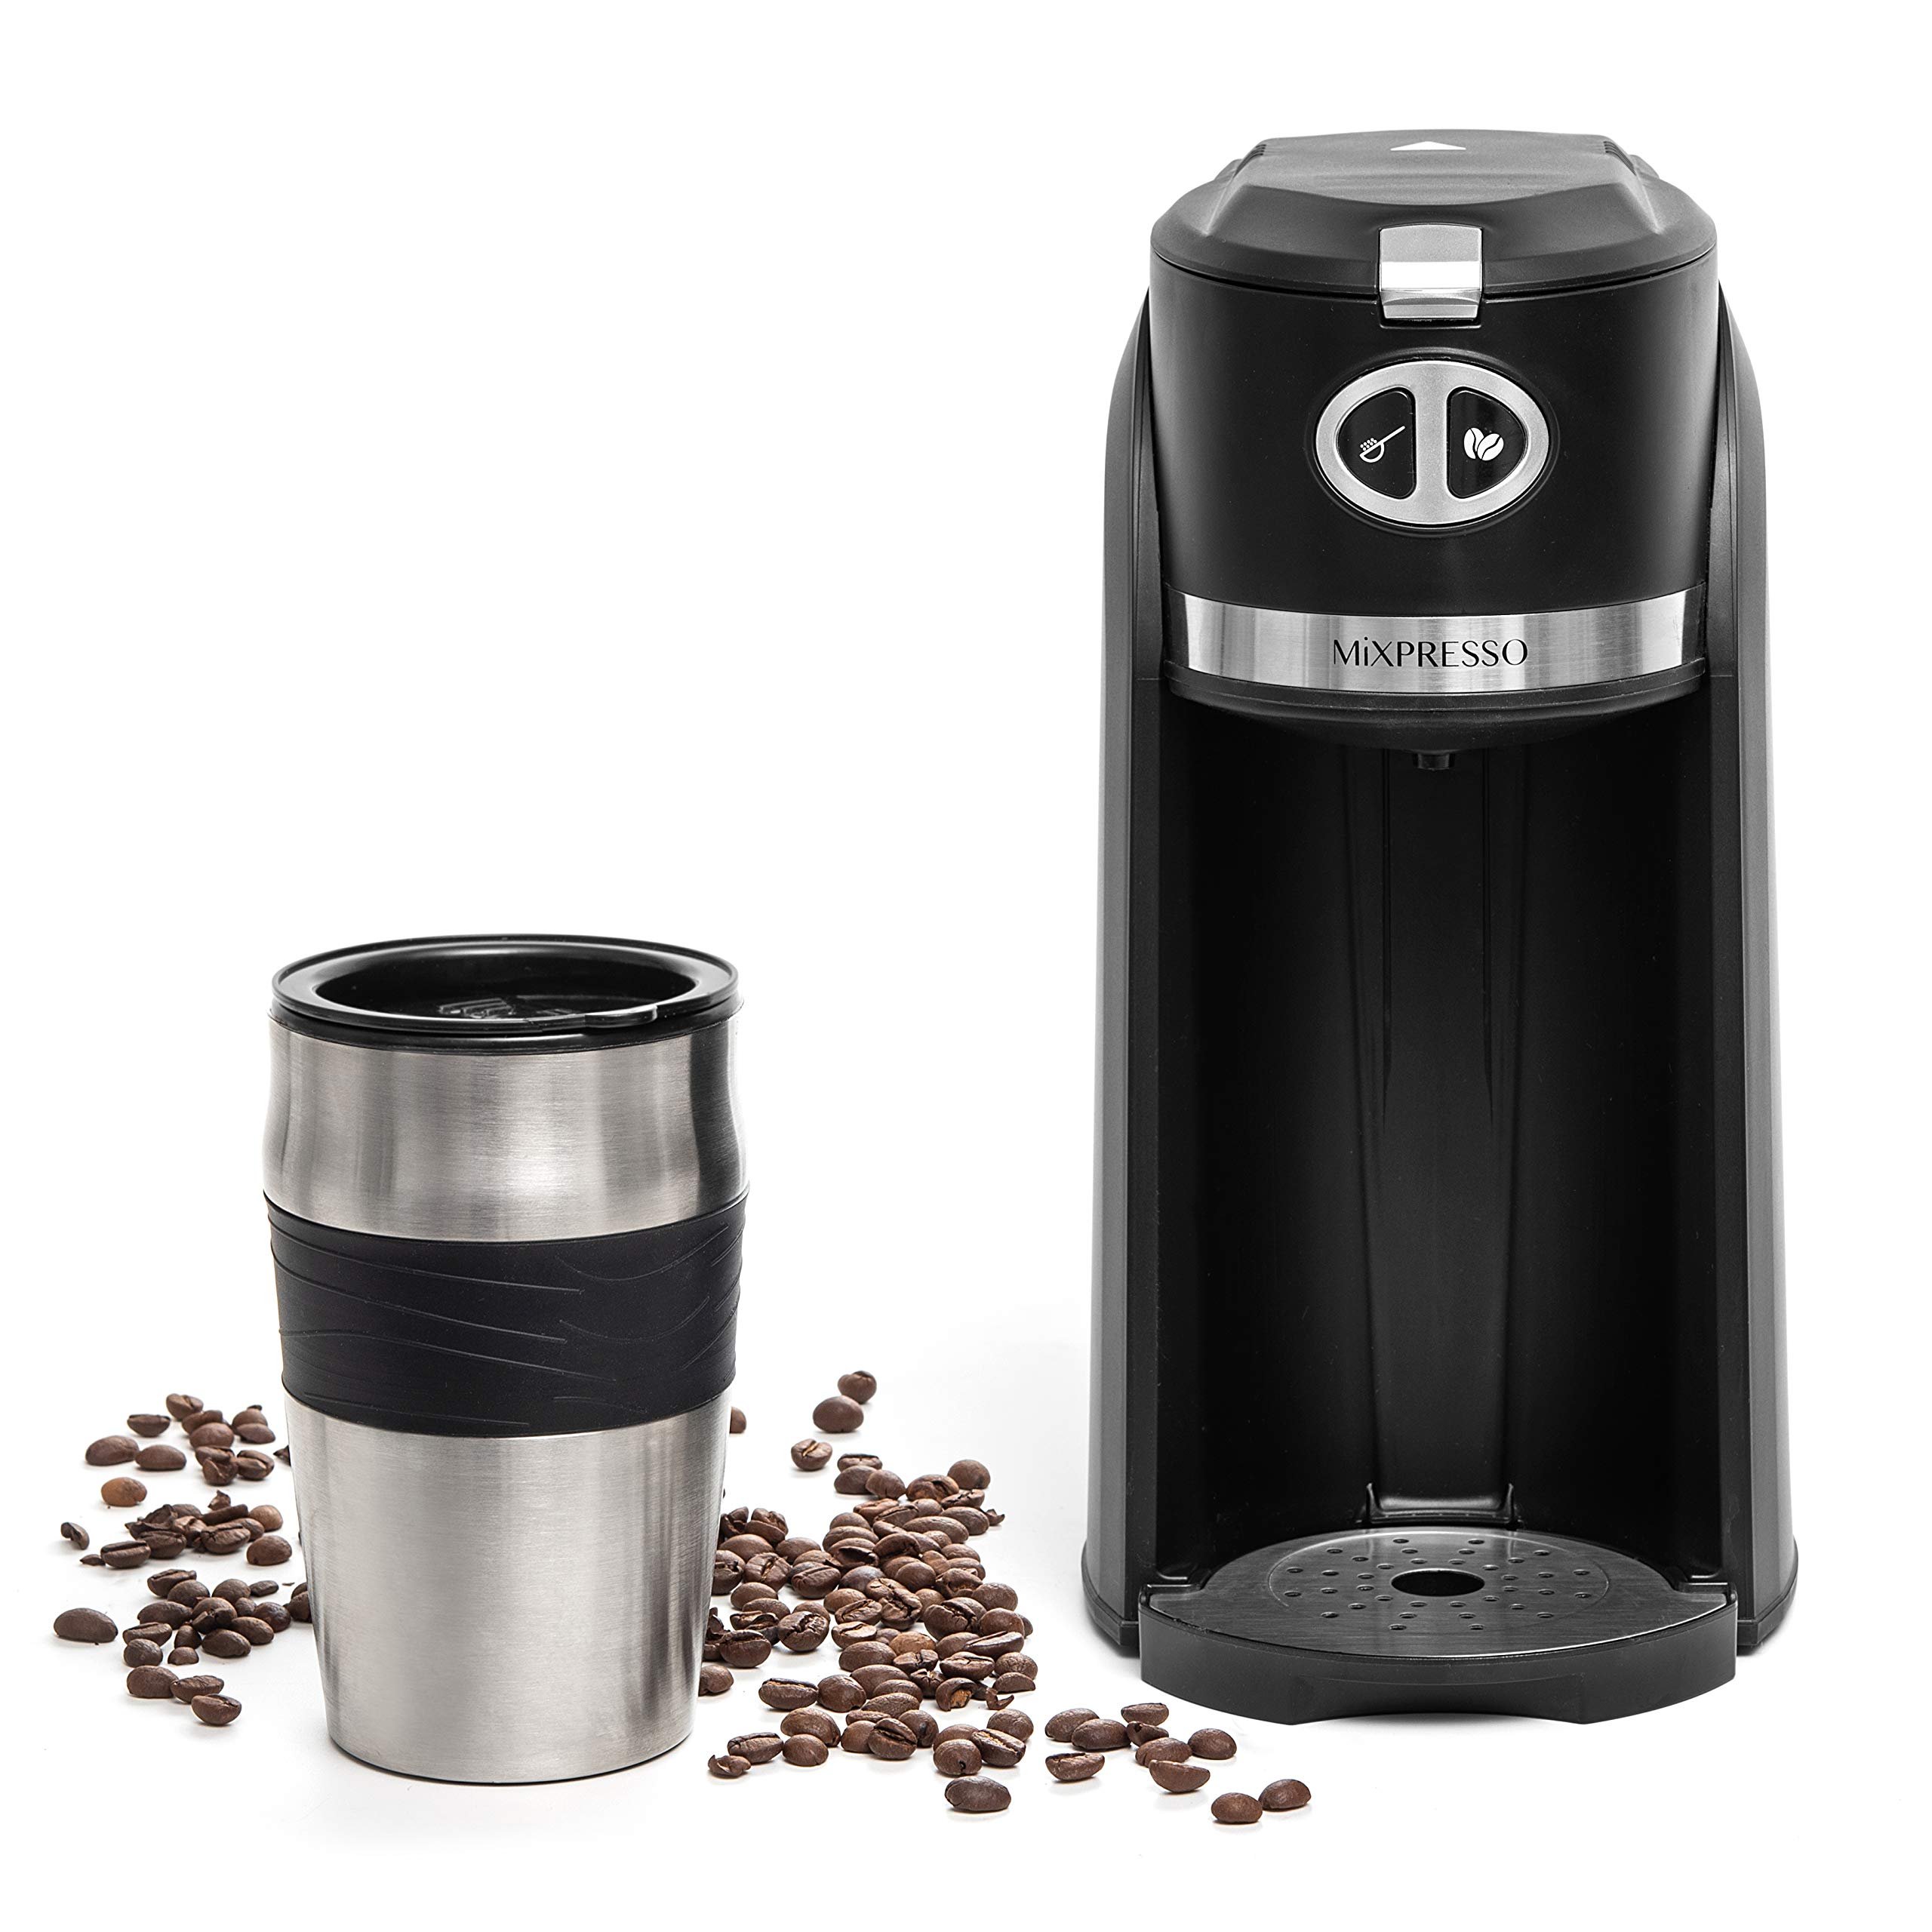 Mixpresso 2 in 1 Grind & Brew Automatic Personal Coffee Maker